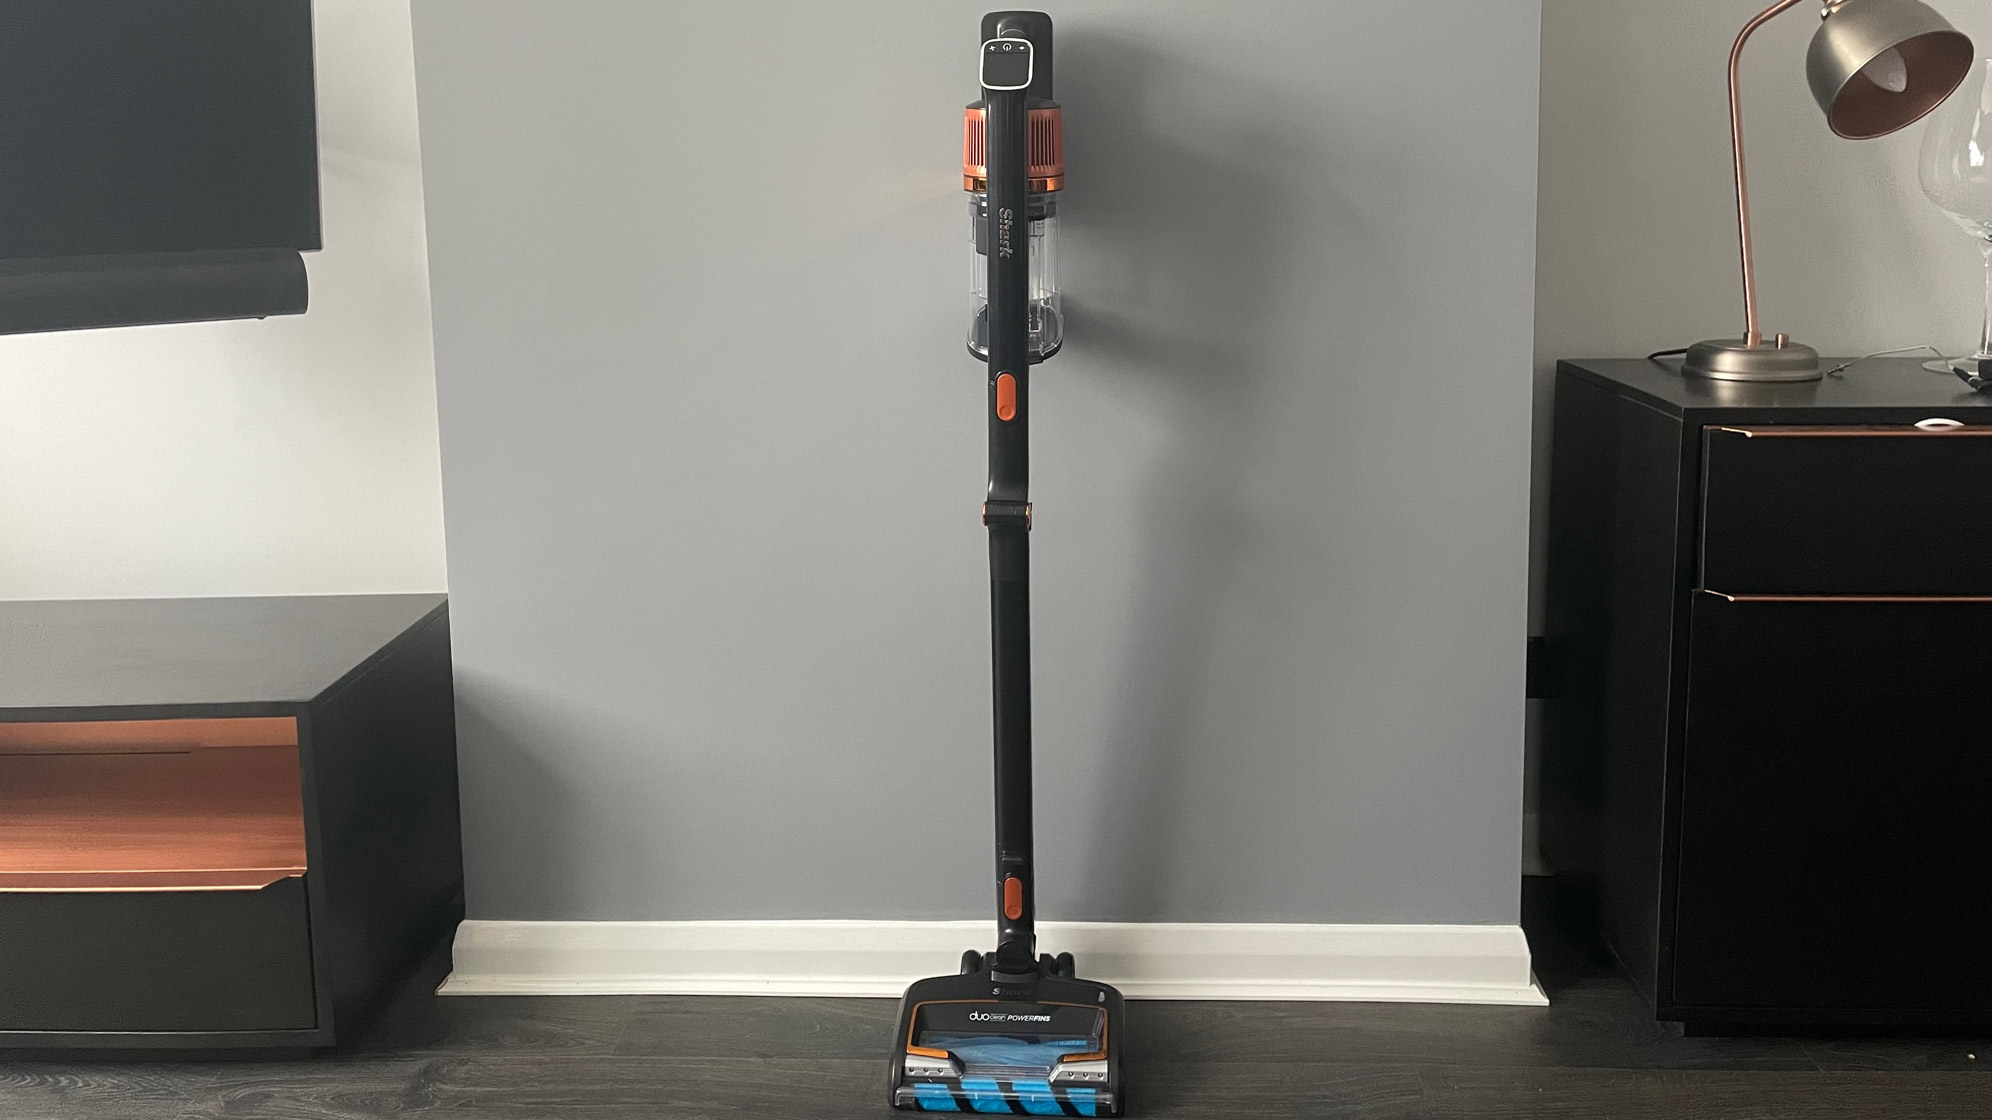 The Shark Anti Hair Wrap Cordless Stick Vacuum Cleaner with PowerFins & Flexology  in stick vacuum mode resting against a grey wall